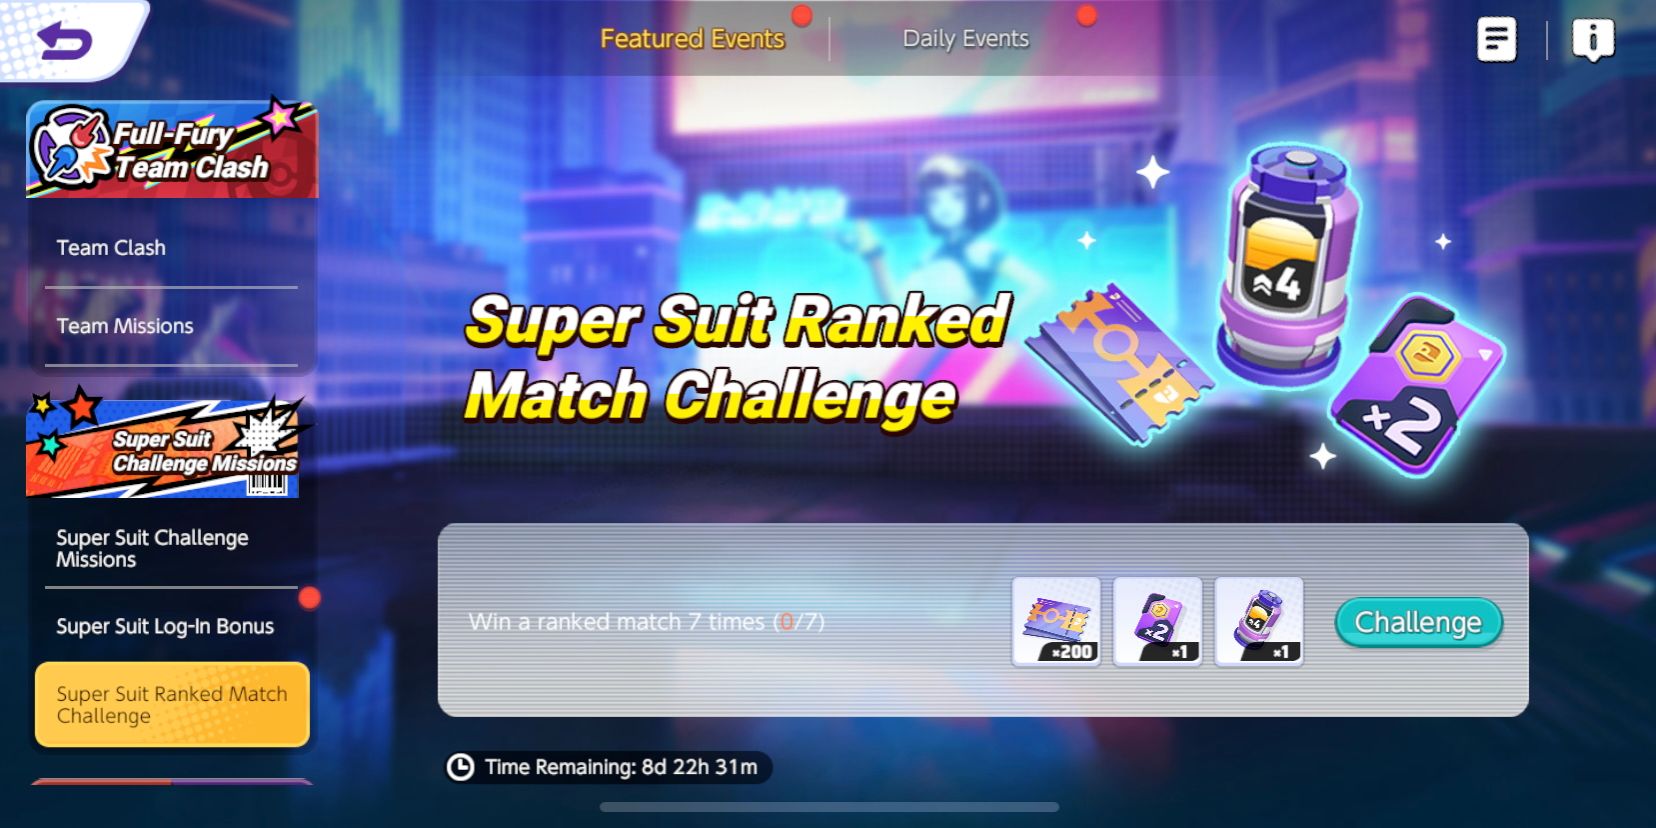 The Super Suit Ranked Match Challenge screen from Pokemon Unite, showing this event mission